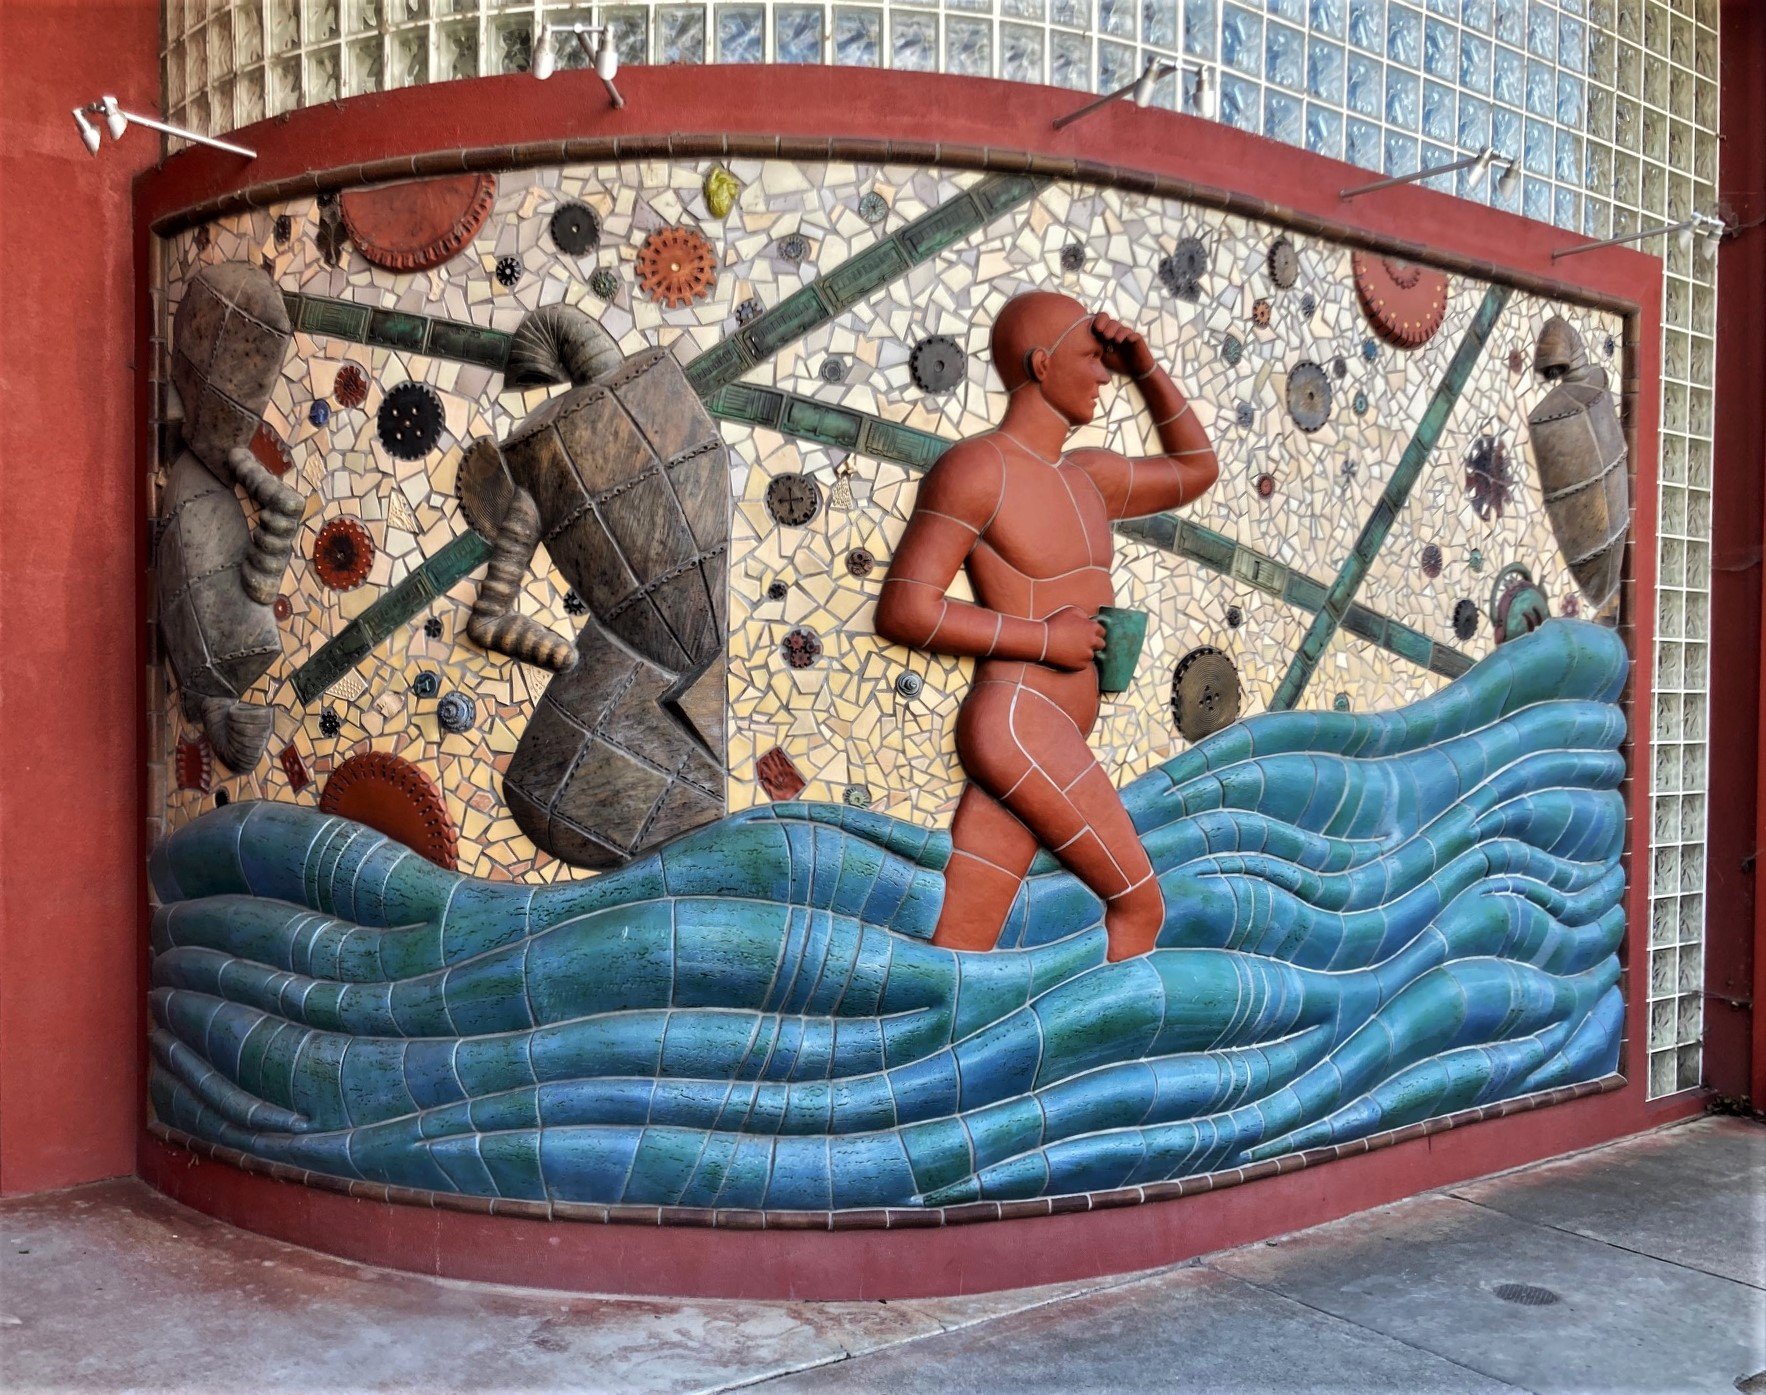 Tile mural in the district